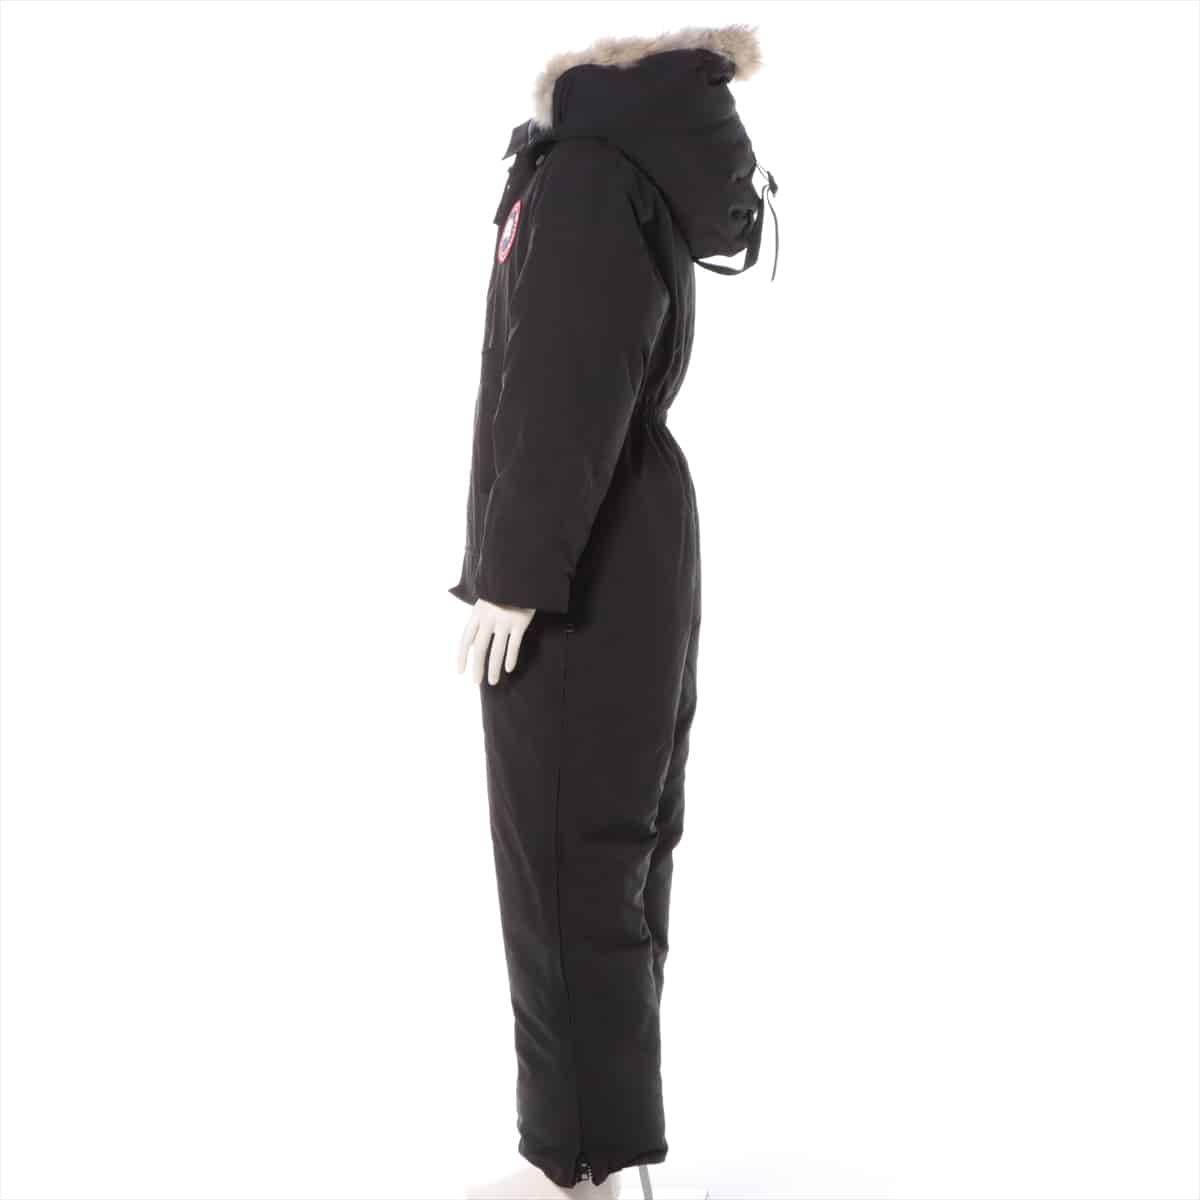 Canada Goose Polyester Jumpsuit S/P Men's Black  2310M Sotheby Arctic Rigger Coveral